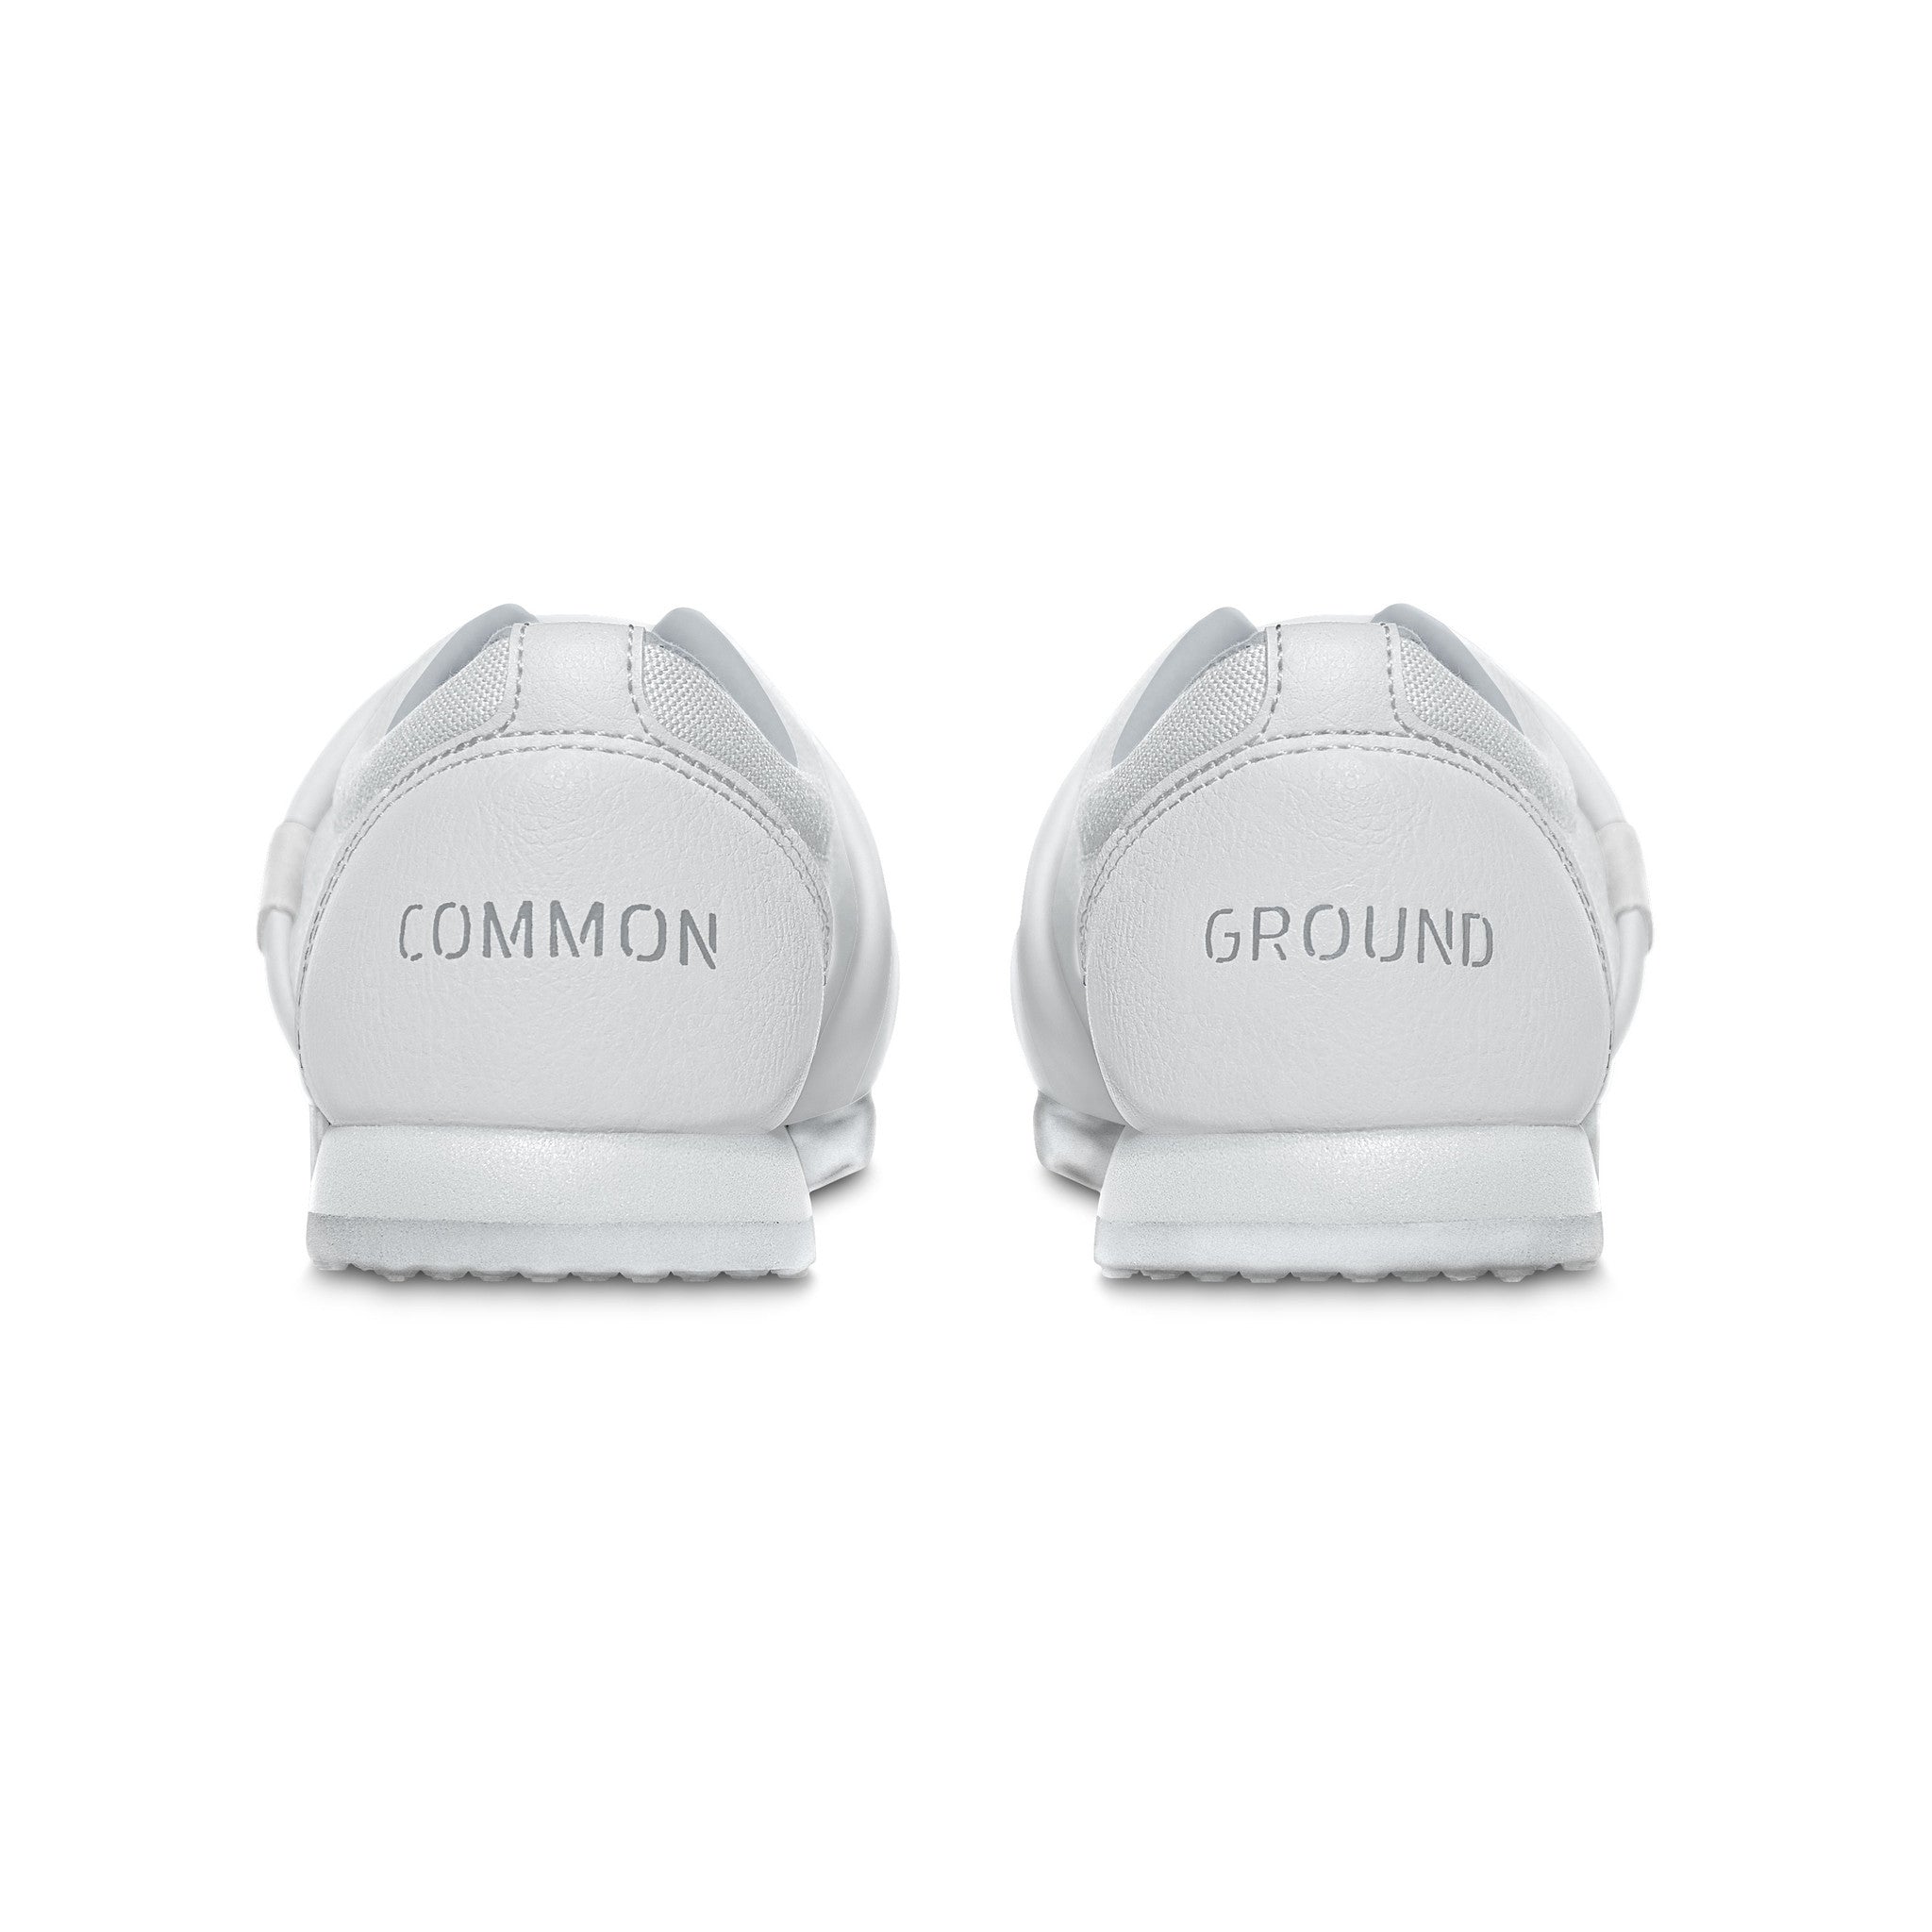 Bright_White - Common Ground Footwear Shoes Heel View